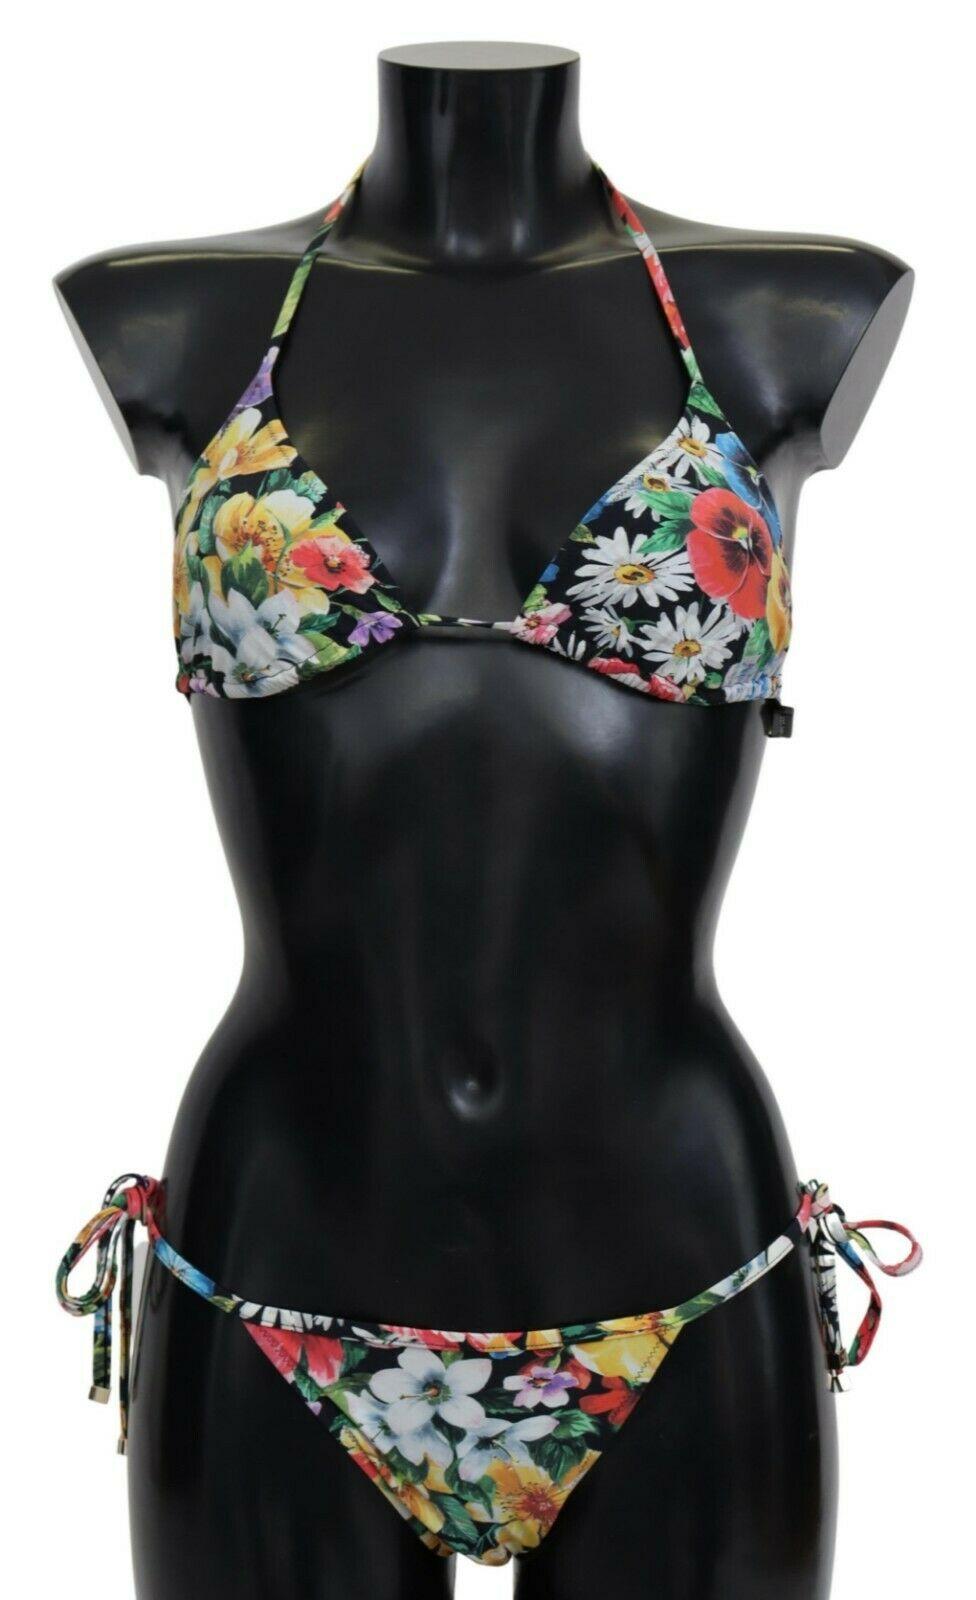 Gorgeous brand new with tags, 100% Authentic Dolce & Gabbana two piece bikini with floral print.


Color: Multicolor 

Model: Bikini two piece set, top and bottom

Material: 75% Nylon 25% Elastane

Logo detailing

Made in Italy

Size: 2IT